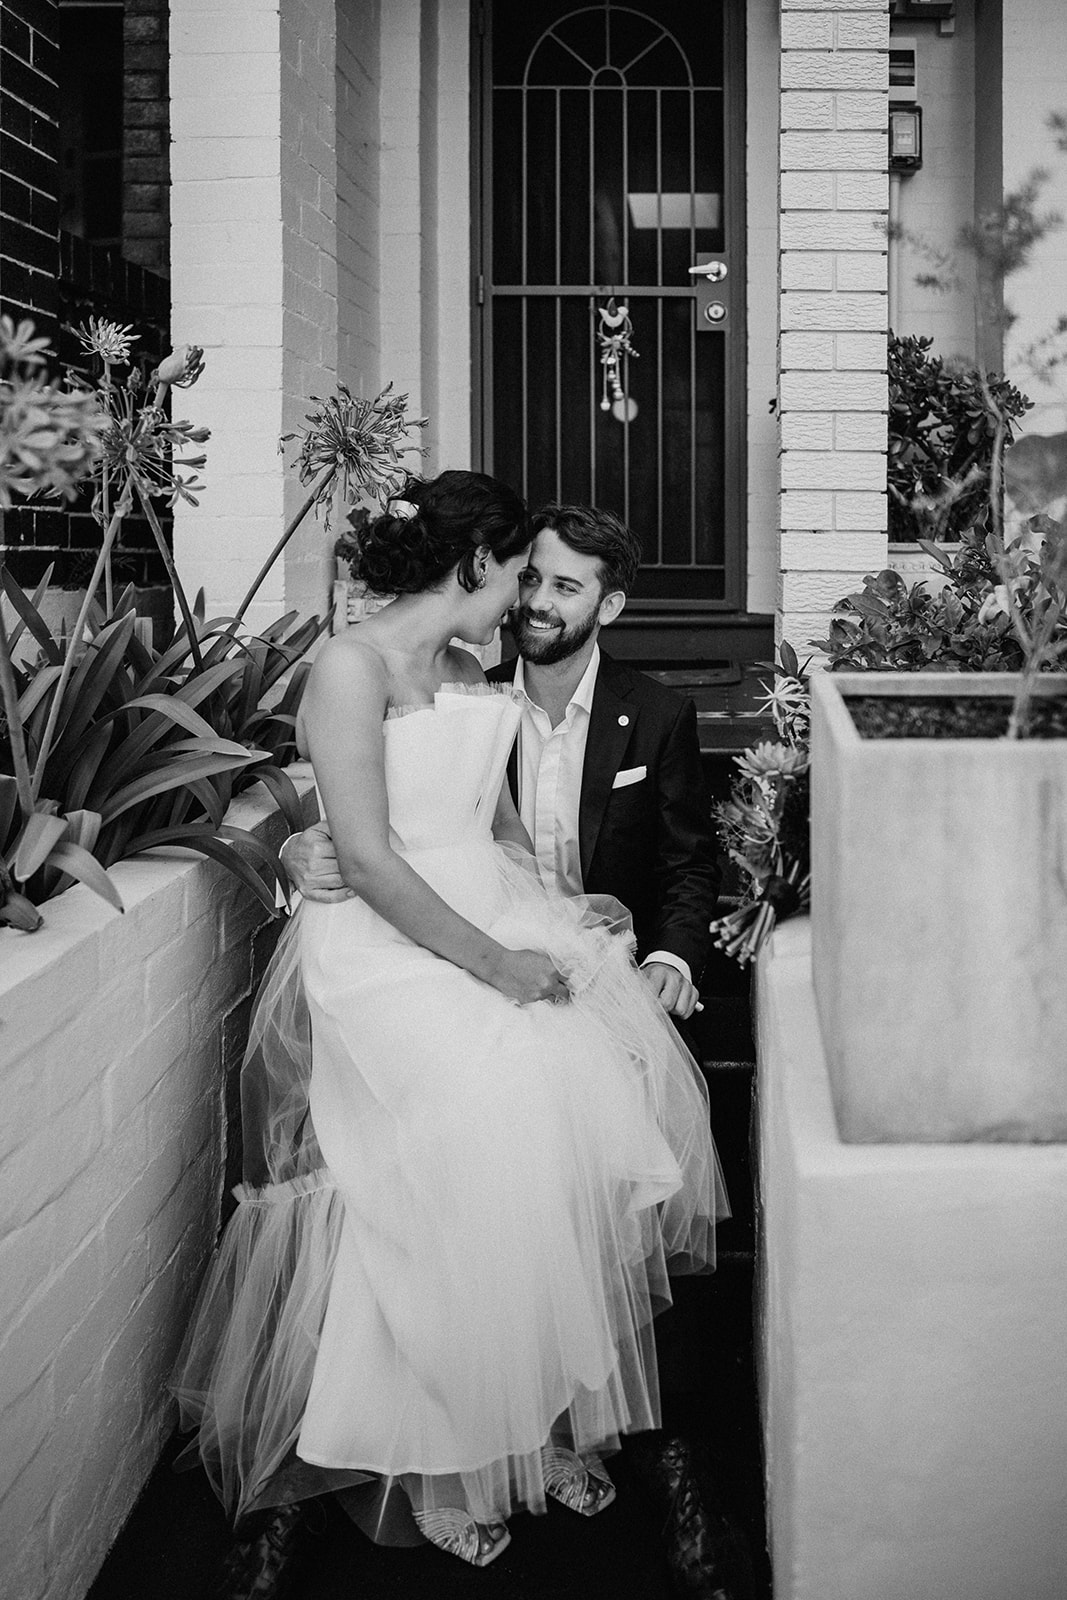 bride and groom portrait on stairs of terrace house